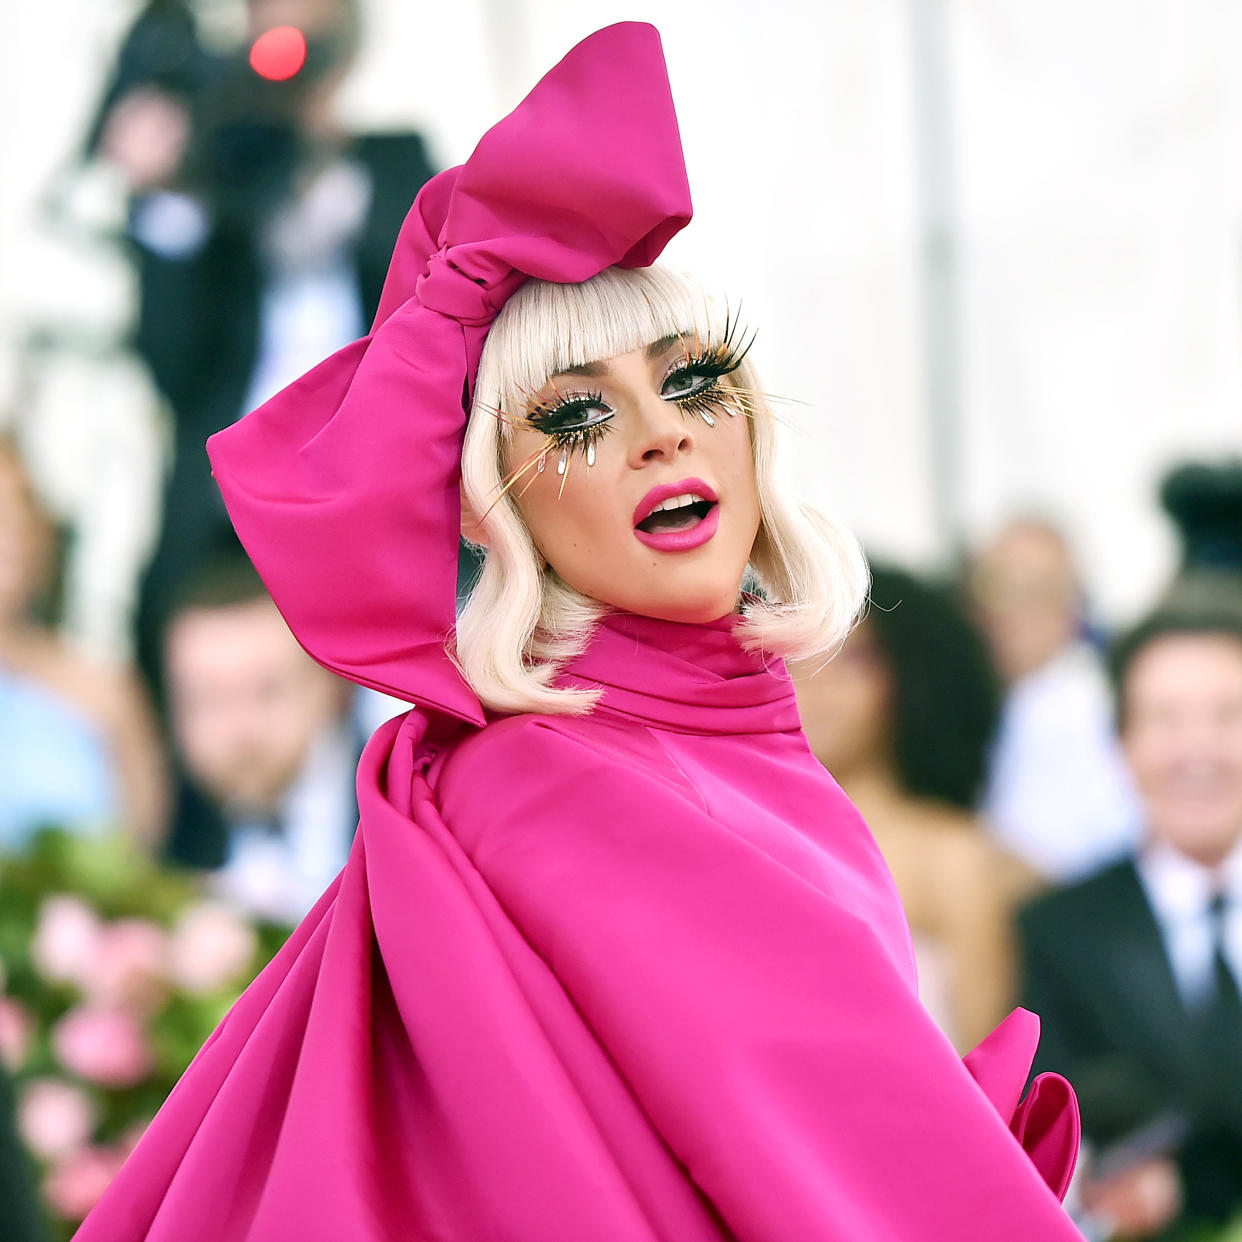 NEW YORK, NEW YORK - MAY 06:  Lady Gaga attends The 2019 Met Gala Celebrating Camp: Notes on Fashionat Metropolitan Museum of Art on May 06, 2019 in New York City. (Photo by Theo Wargo/WireImage)